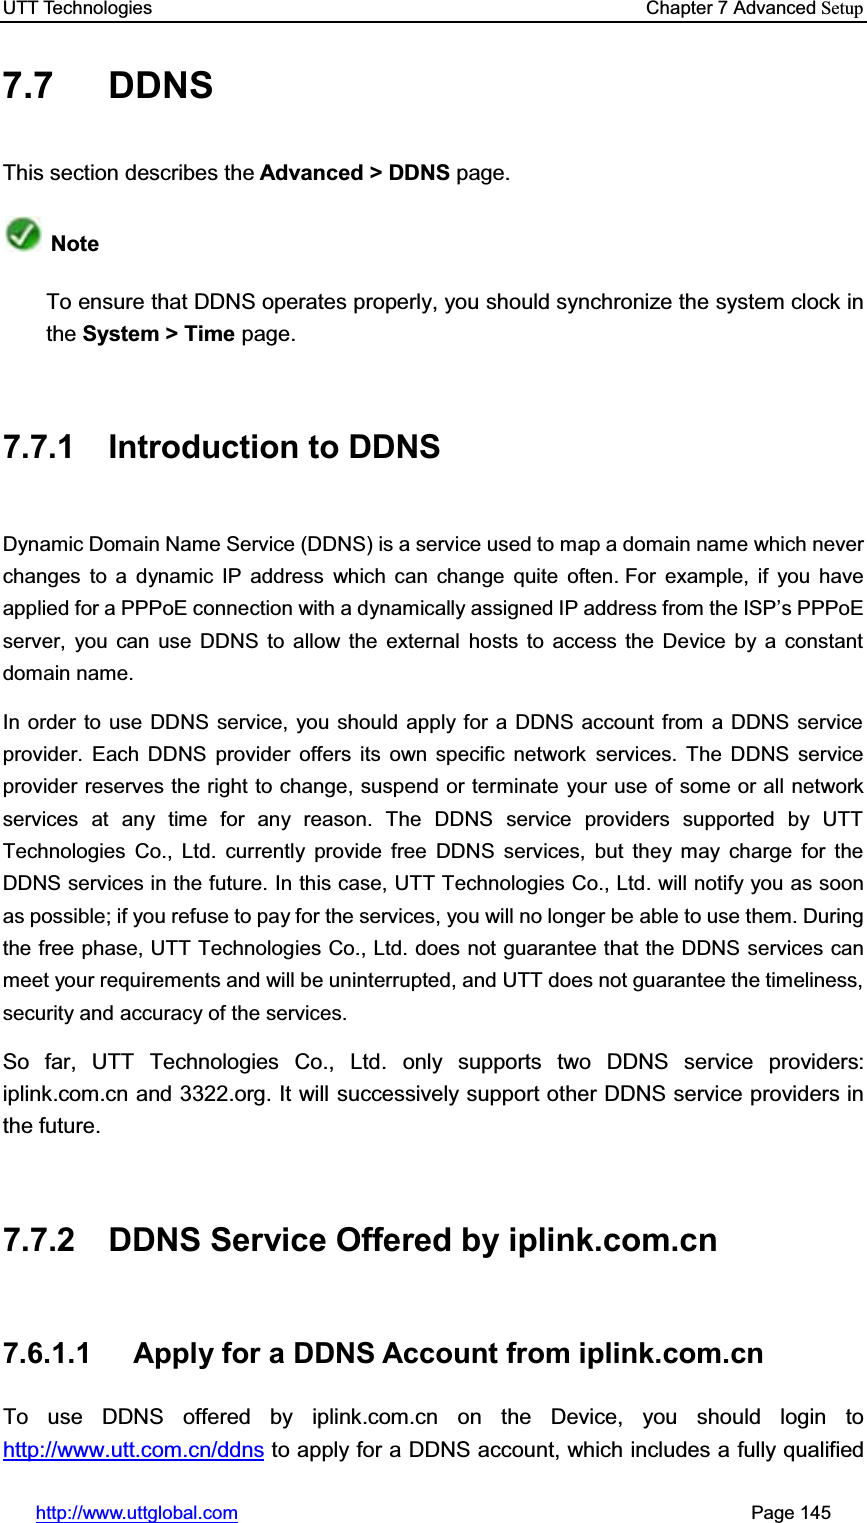 UTT Technologies    Chapter 7 Advanced Setuphttp://www.uttglobal.com                                                       Page 145 7.7 DDNS This section describes the Advanced &gt; DDNS page. NoteTo ensure that DDNS operates properly, you should synchronize the system clock in the System &gt; Time page. 7.7.1 Introduction to DDNS Dynamic Domain Name Service (DDNS) is a service used to map a domain name which never changes to a dynamic IP address which can change quite often. For example, if you have applied for a PPPoE connection with a dynamically DVVLJQHG,3DGGUHVVIURPWKH,63¶s PPPoE server, you can use DDNS to allow the external hosts to access the Device by a constant domain name.   In order to use DDNS service, you should apply for a DDNS account from a DDNS service provider. Each DDNS provider offers its own specific network services. The DDNS service provider reserves the right to change, suspend or terminate your use of some or all network services at any time for any reason. The DDNS service providers supported by UTT Technologies Co., Ltd. currently provide free DDNS services, but they may charge for the DDNS services in the future. In this case, UTT Technologies Co., Ltd. will notify you as soon as possible; if you refuse to pay for the services, you will no longer be able to use them. During the free phase, UTT Technologies Co., Ltd. does not guarantee that the DDNS services can meet your requirements and will be uninterrupted, and UTT does not guarantee the timeliness, security and accuracy of the services. So far, UTT Technologies Co., Ltd. only supports two DDNS service providers: iplink.com.cn and 3322.org. It will successively support other DDNS service providers in the future.   7.7.2 DDNS Service Offered by iplink.com.cn 7.6.1.1  Apply for a DDNS Account from iplink.com.cn To use DDNS offered by iplink.com.cn on the Device, you should login to http://www.utt.com.cn/ddns to apply for a DDNS account, which includes a fully qualified 